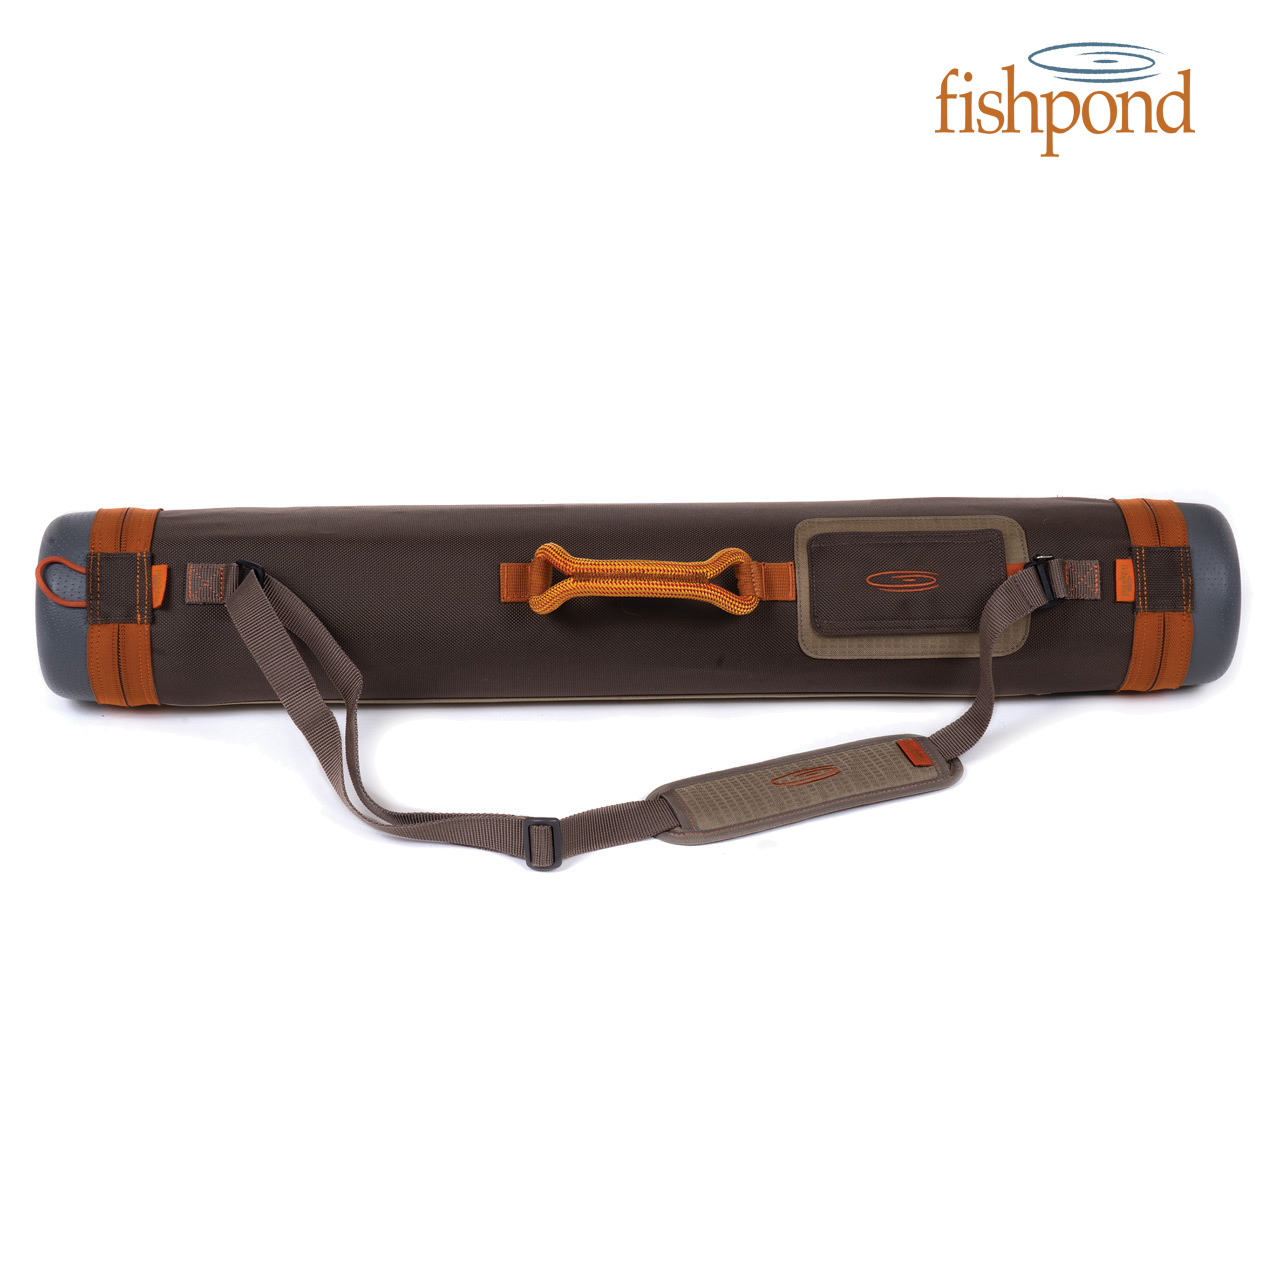 Tenkara Rod Cases: fly-rod cases to protect your rod